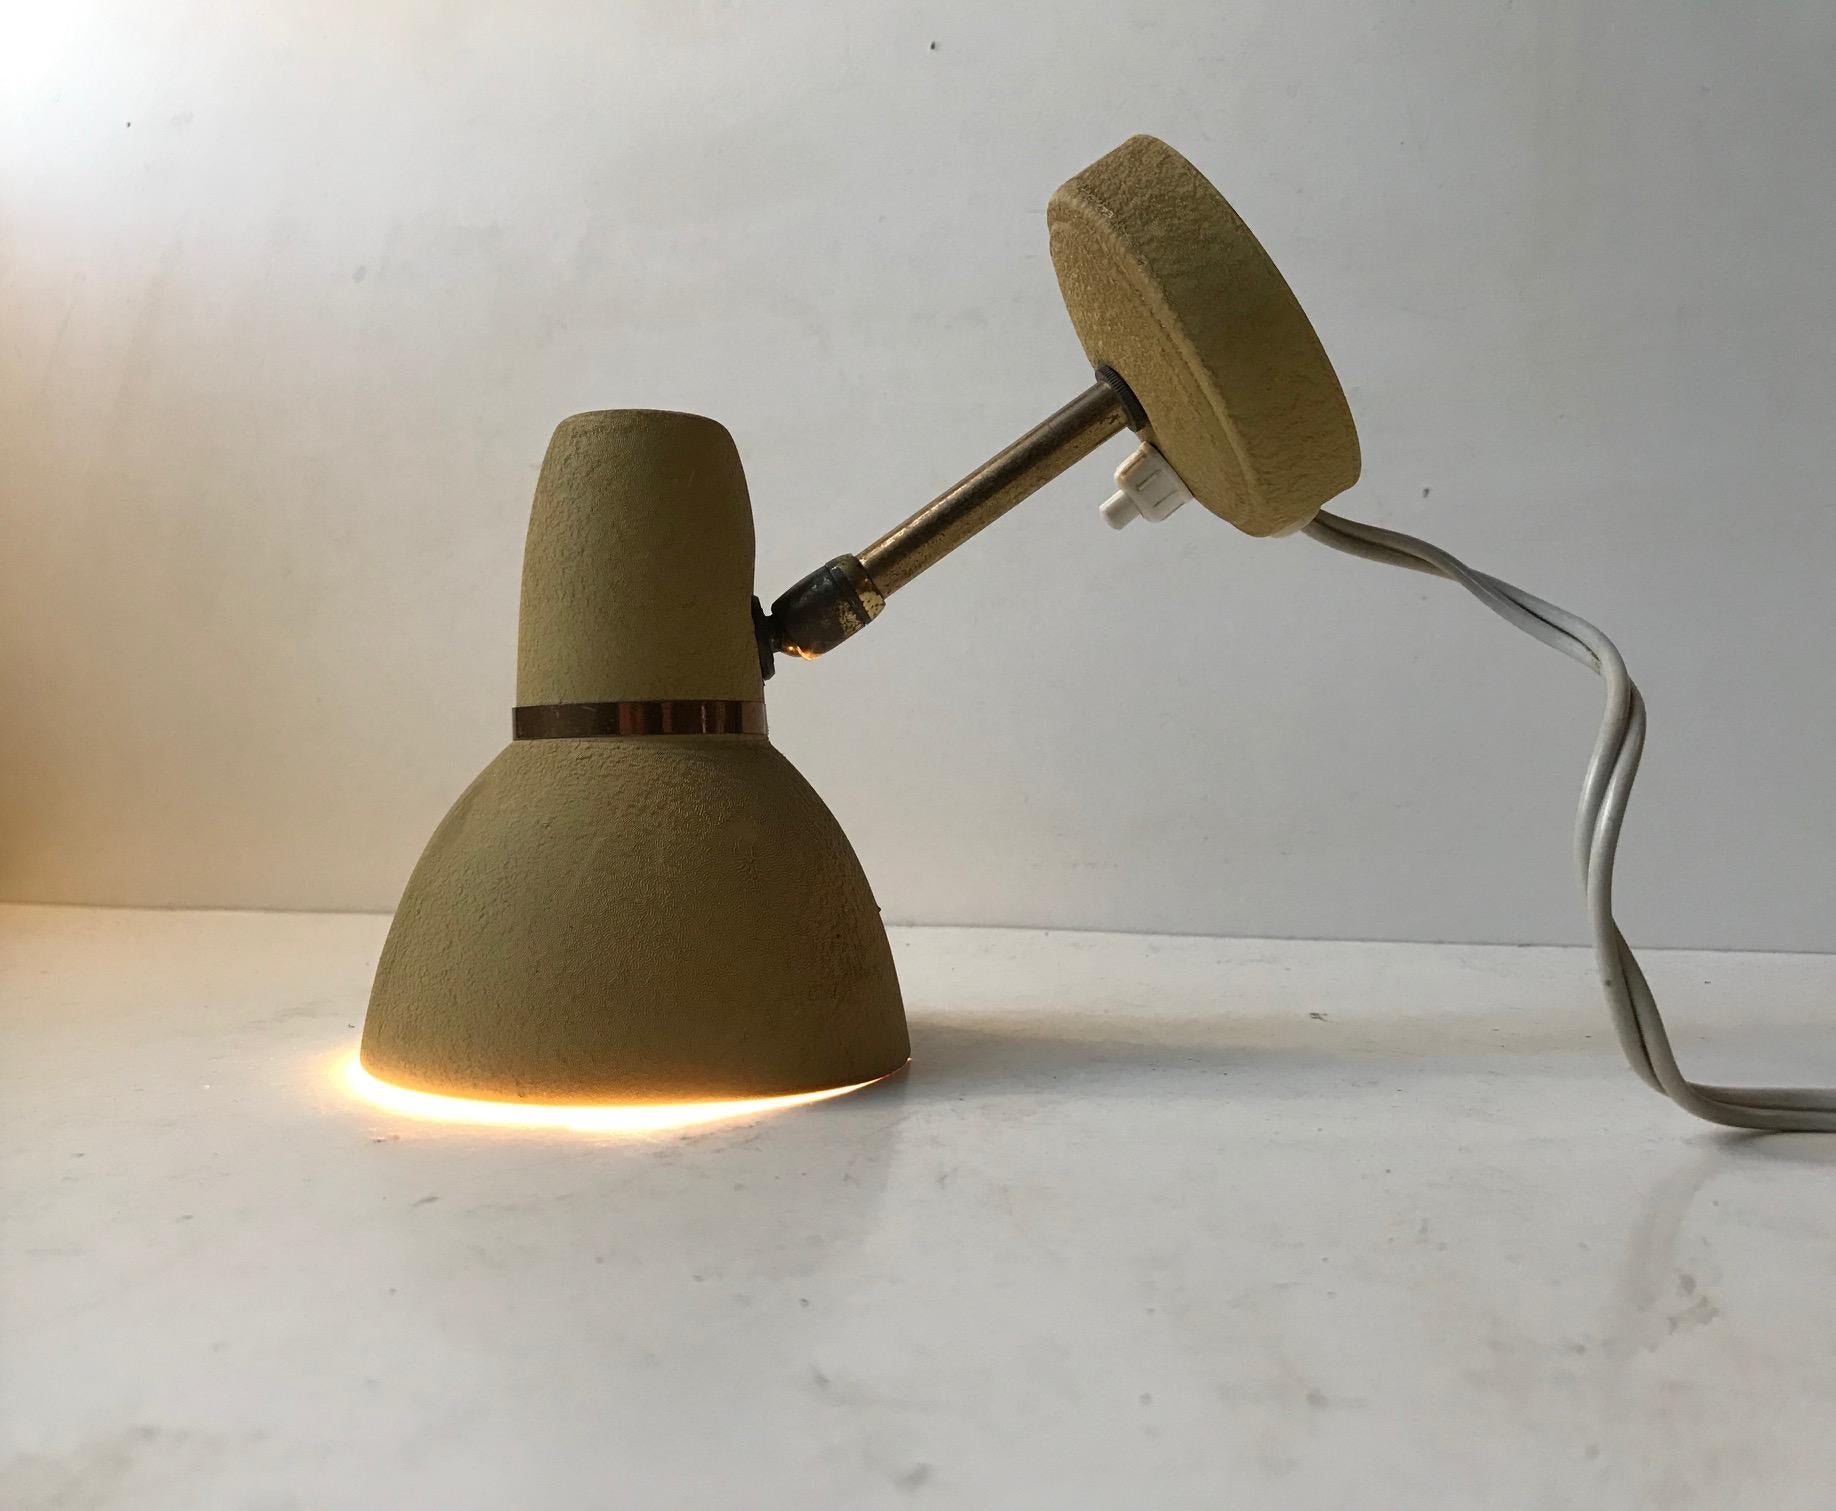 Small adjustable wall lamp made from brass and aluminium. The pastel mustard yellow lacquer has been applied in such a way that its surface mimics leather. It was made in Scandinavia during the 1950s, probably by ASEA or Falkenberg.